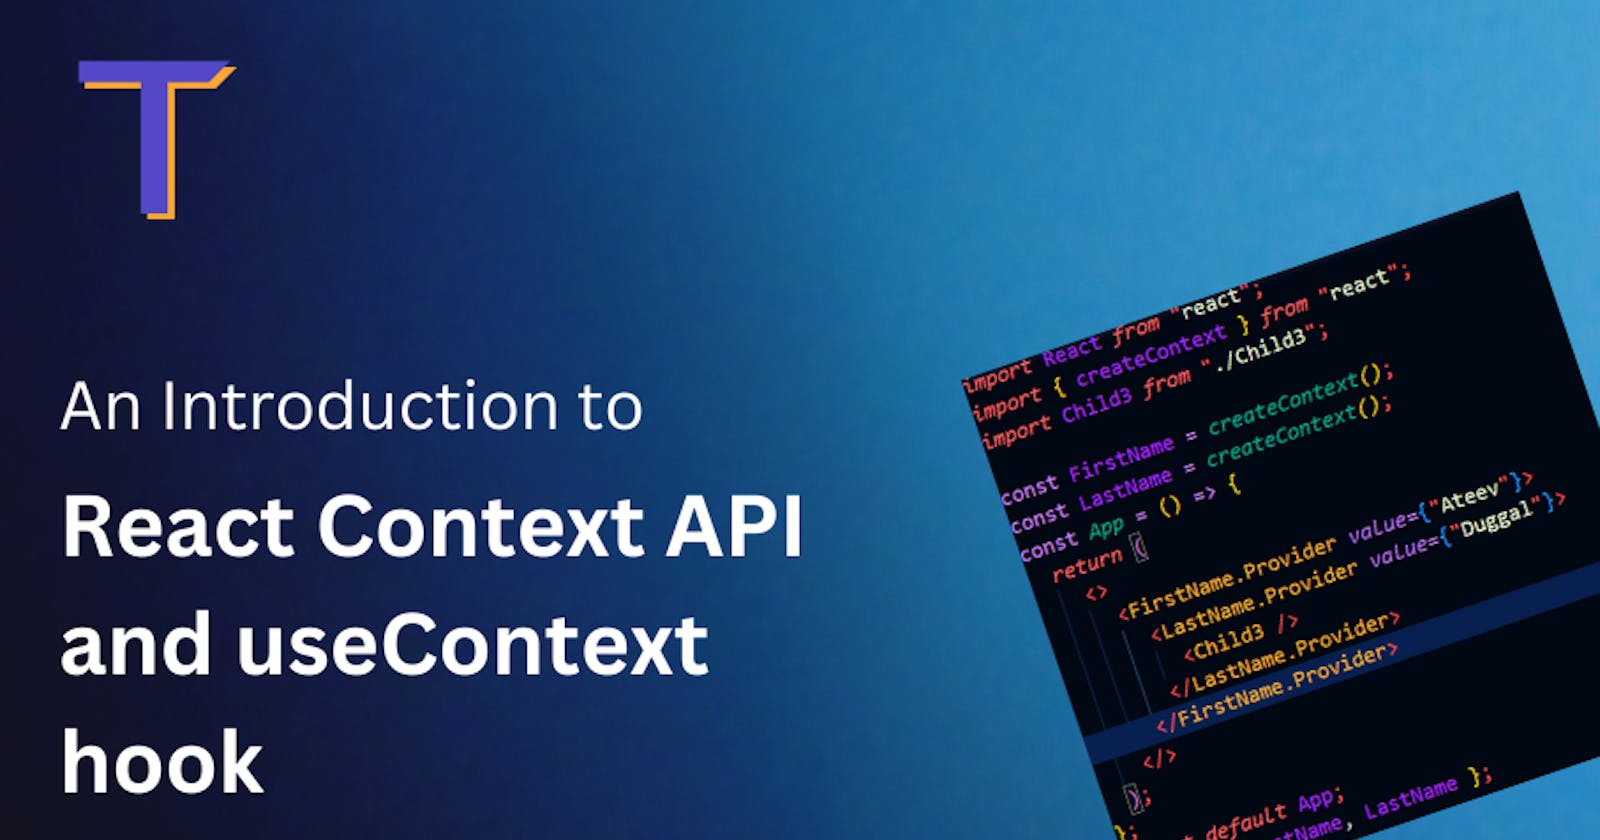 A guide to React Context API and useContext hook.